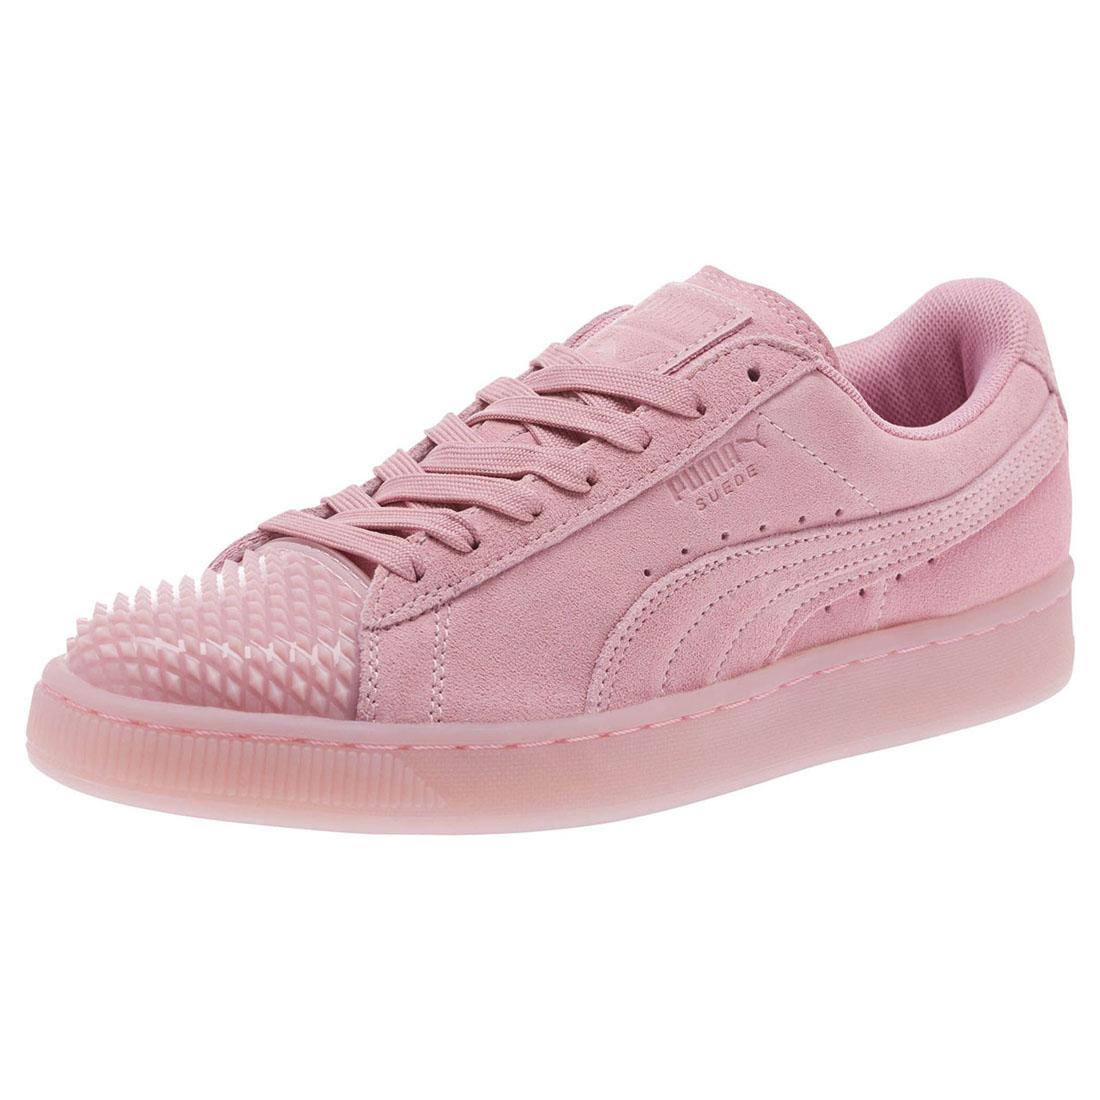 pink puma suede shoes